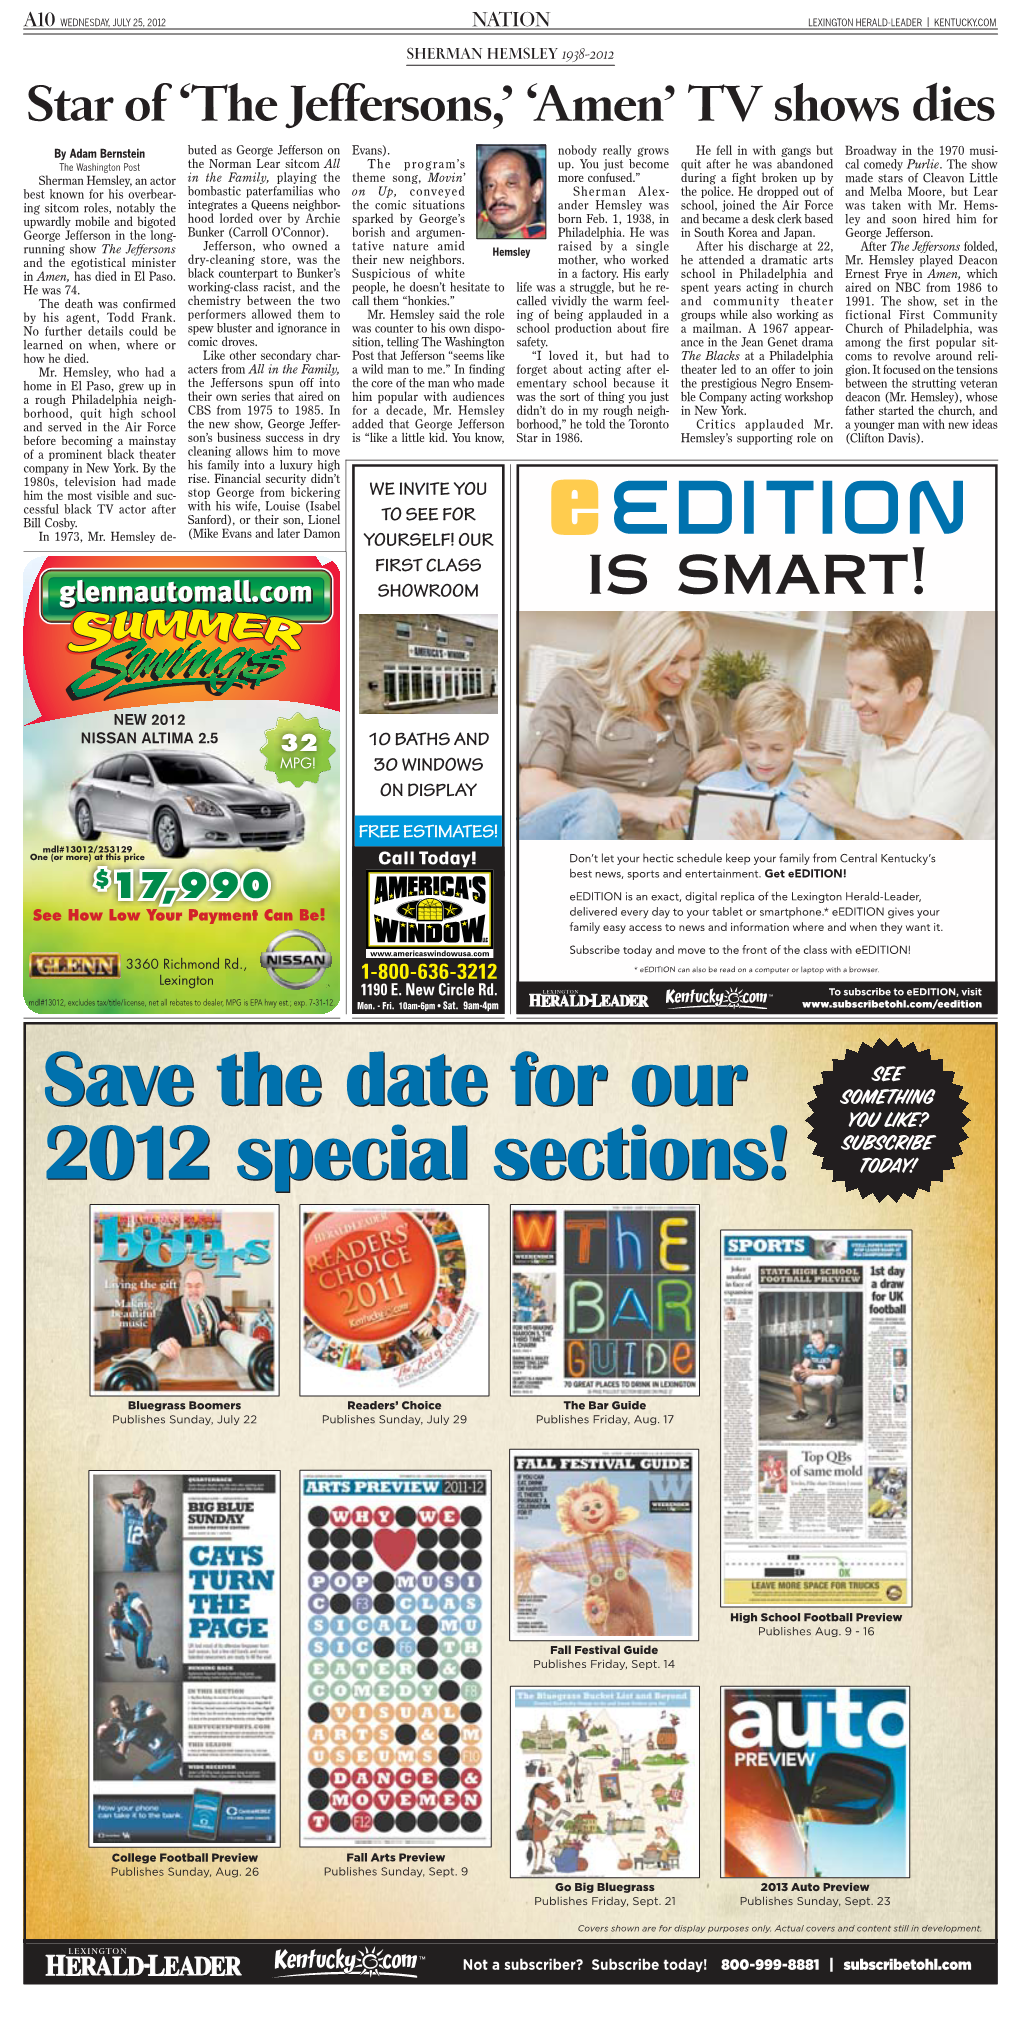 Save the Date for Our 2012 Special Sections!